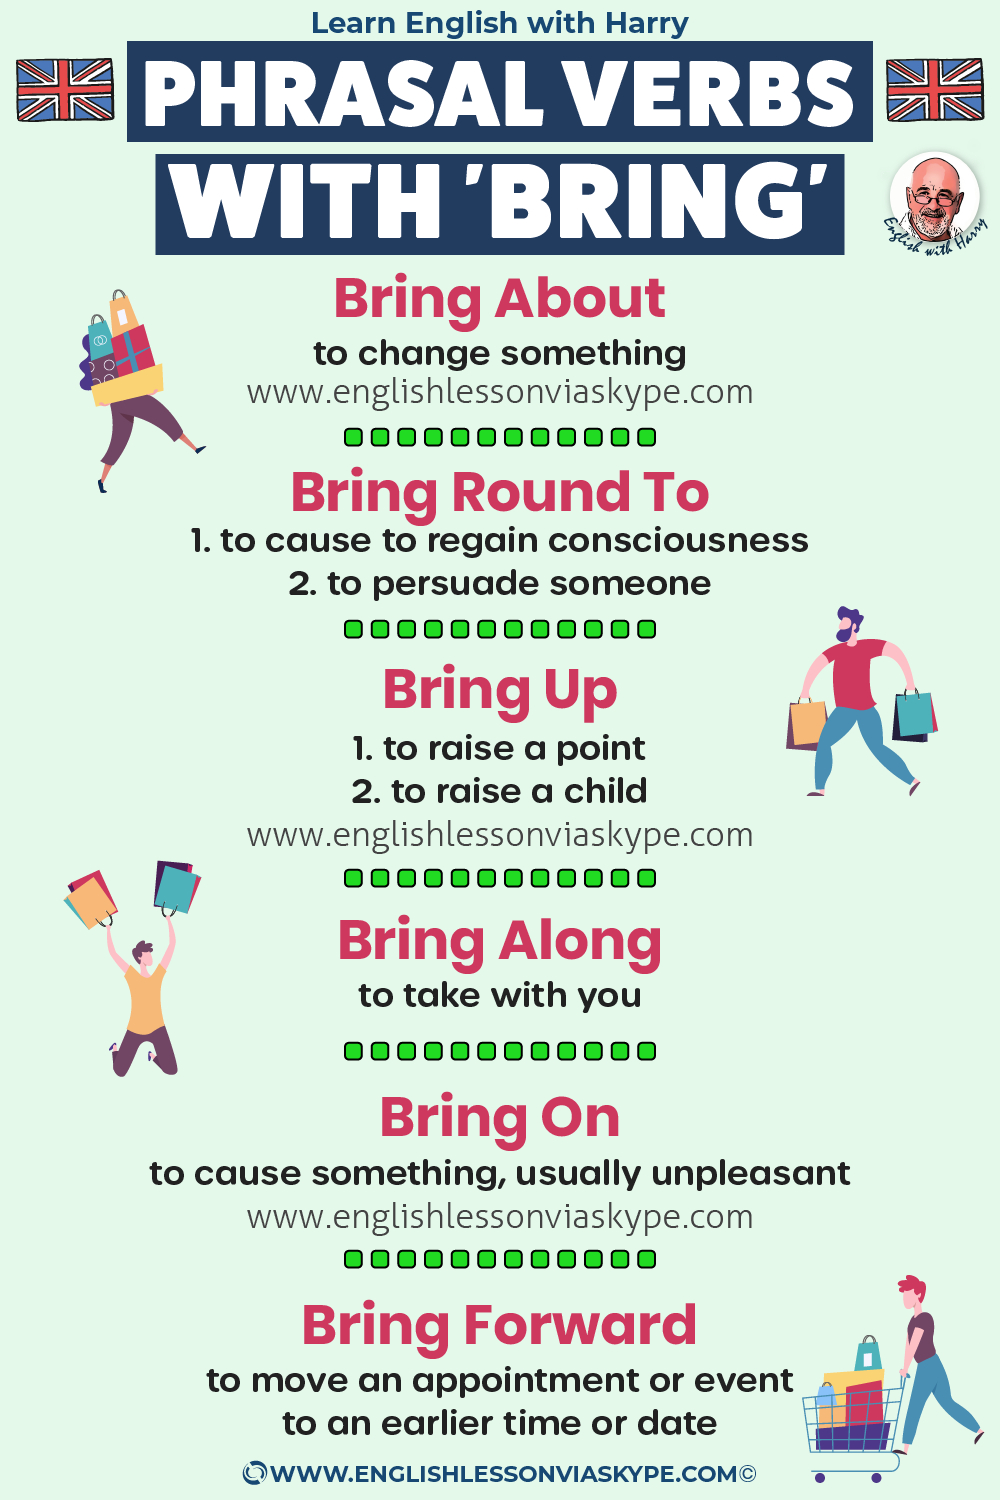 13 Phrasal Verbs with Bring. Online English lessons on Zoom. Study advanced English at www.englishlessonviaskype.com #learnenglish